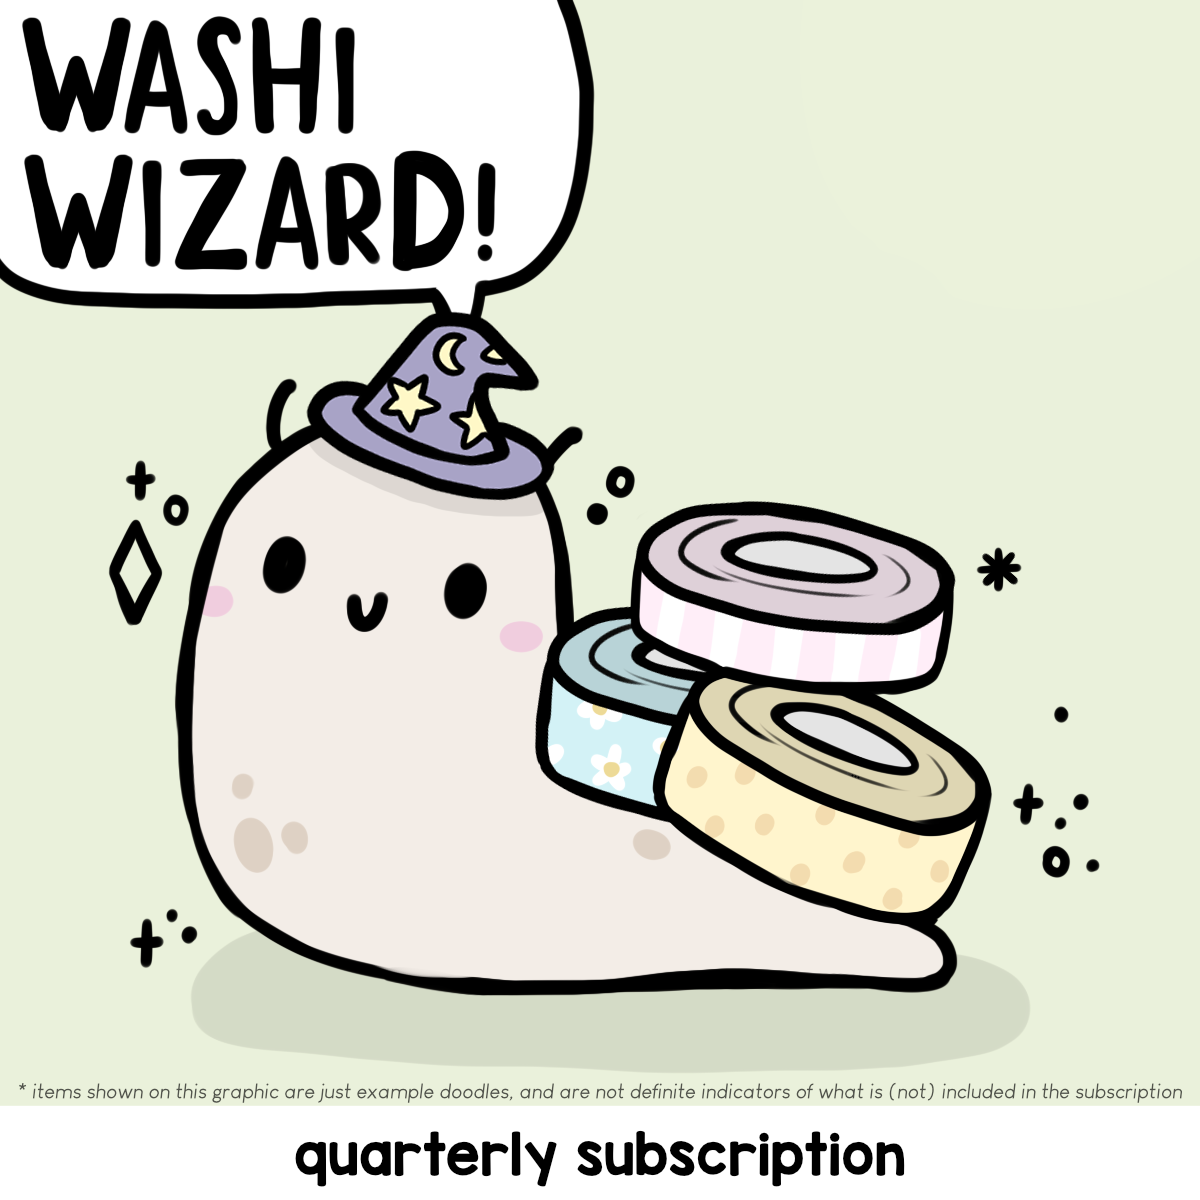 Washi Wizard Stationery Subscription - Must Be Purchased Alone